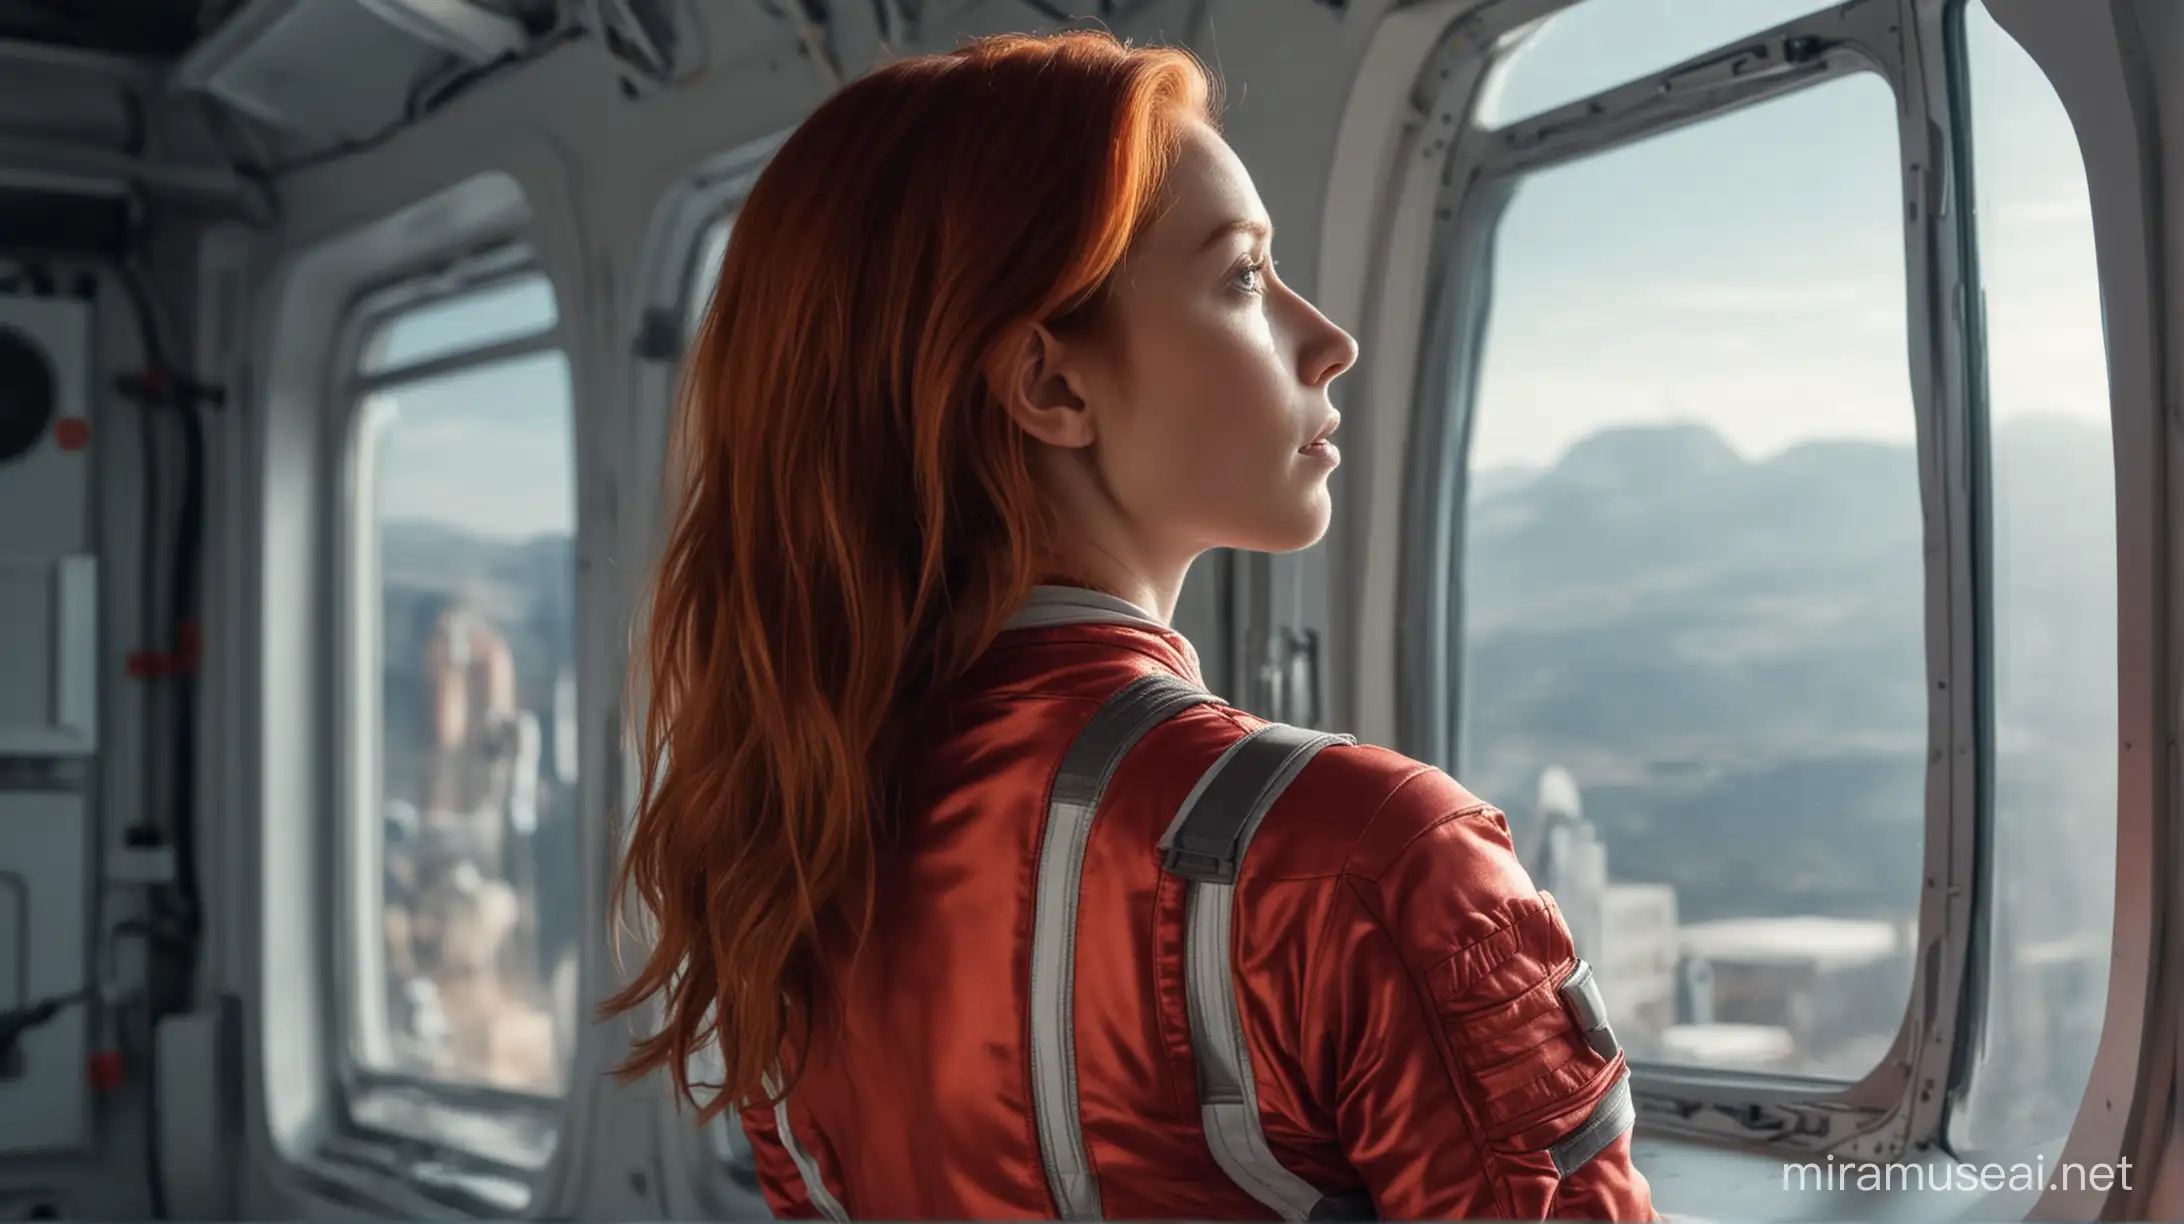 RedHaired Astronaut in FormFitting Spacesuit Gazing at the Cosmos